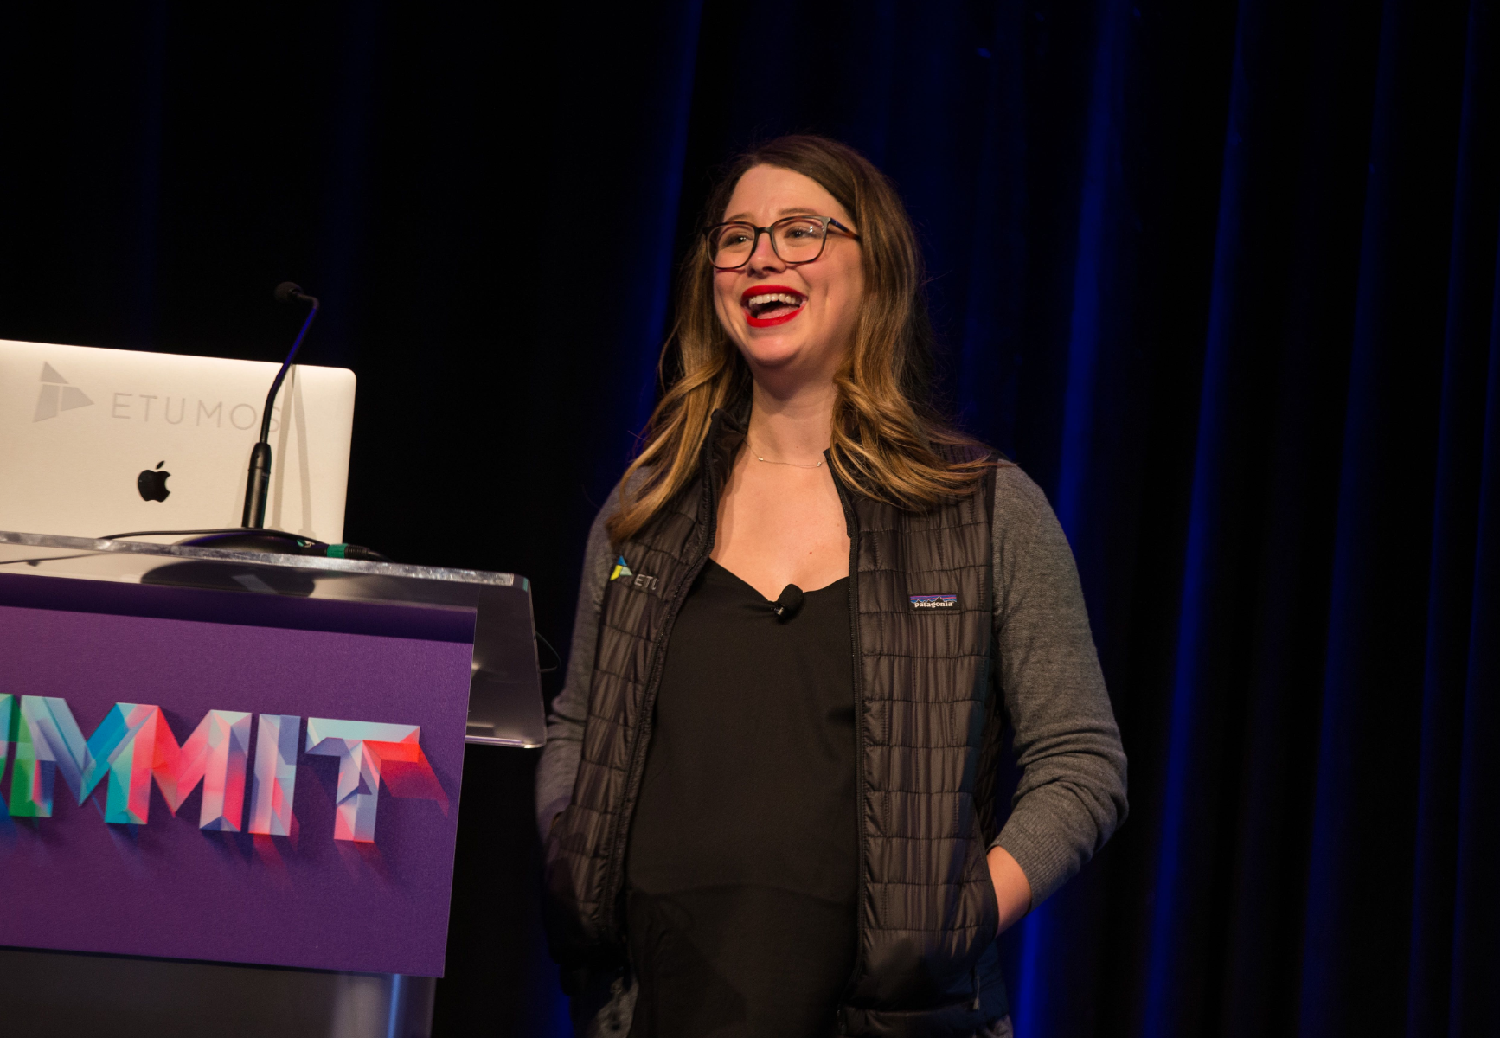 Sydney Mulligan, during one of her sessions at The Adobe Summit in 2019